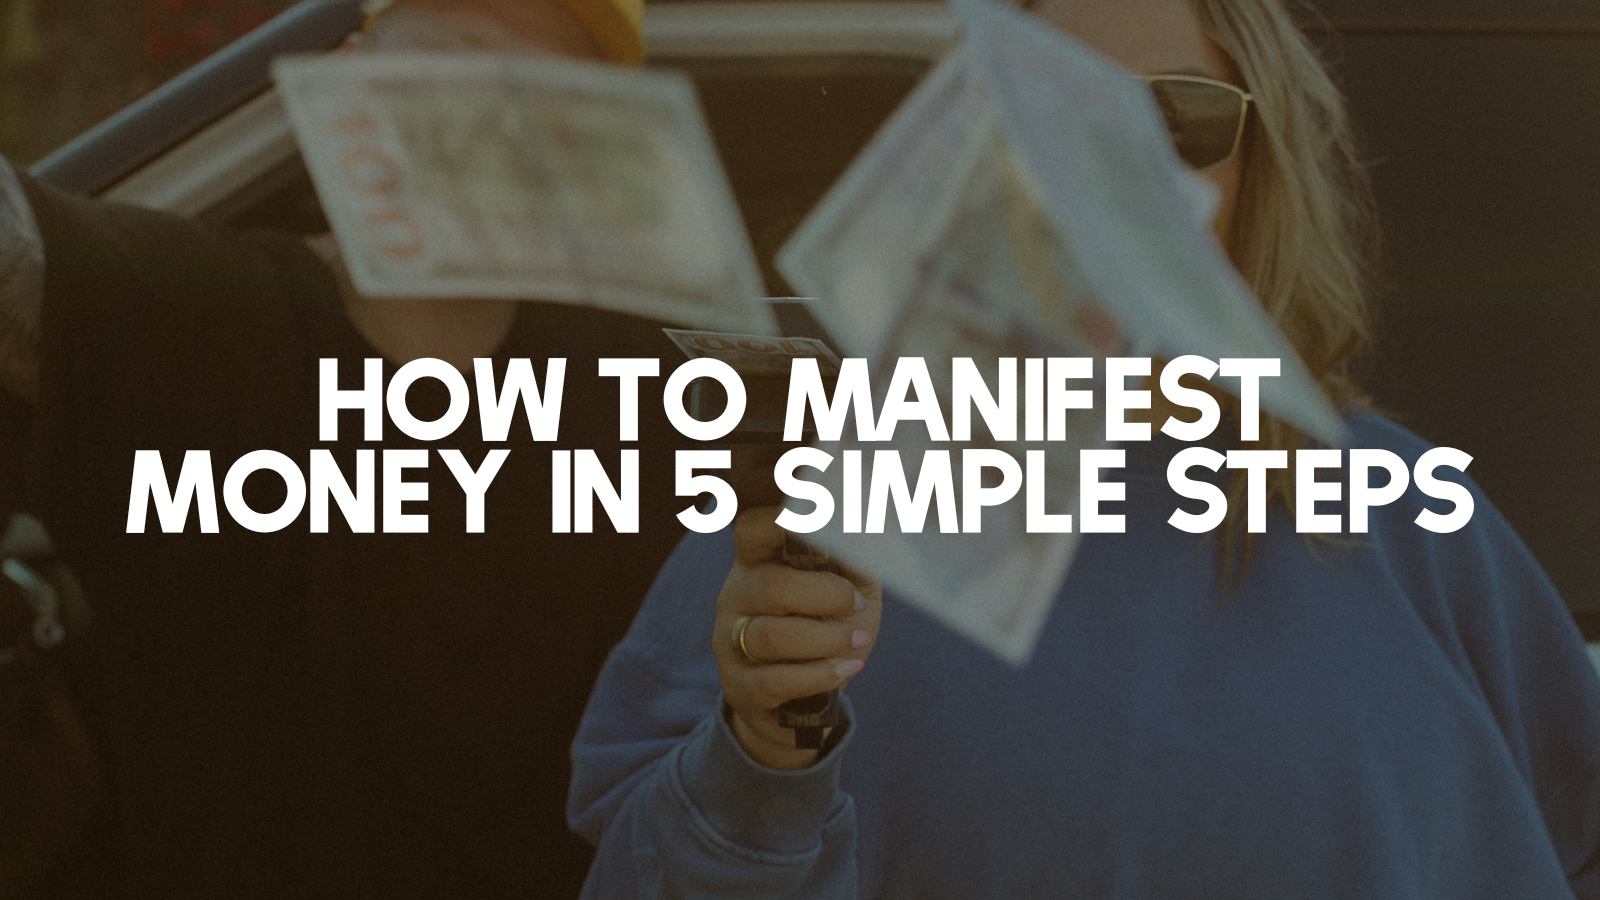 If I Wanted To MANIFEST $10,000 A MONTH, Here's What I'd Do (3 Steps)